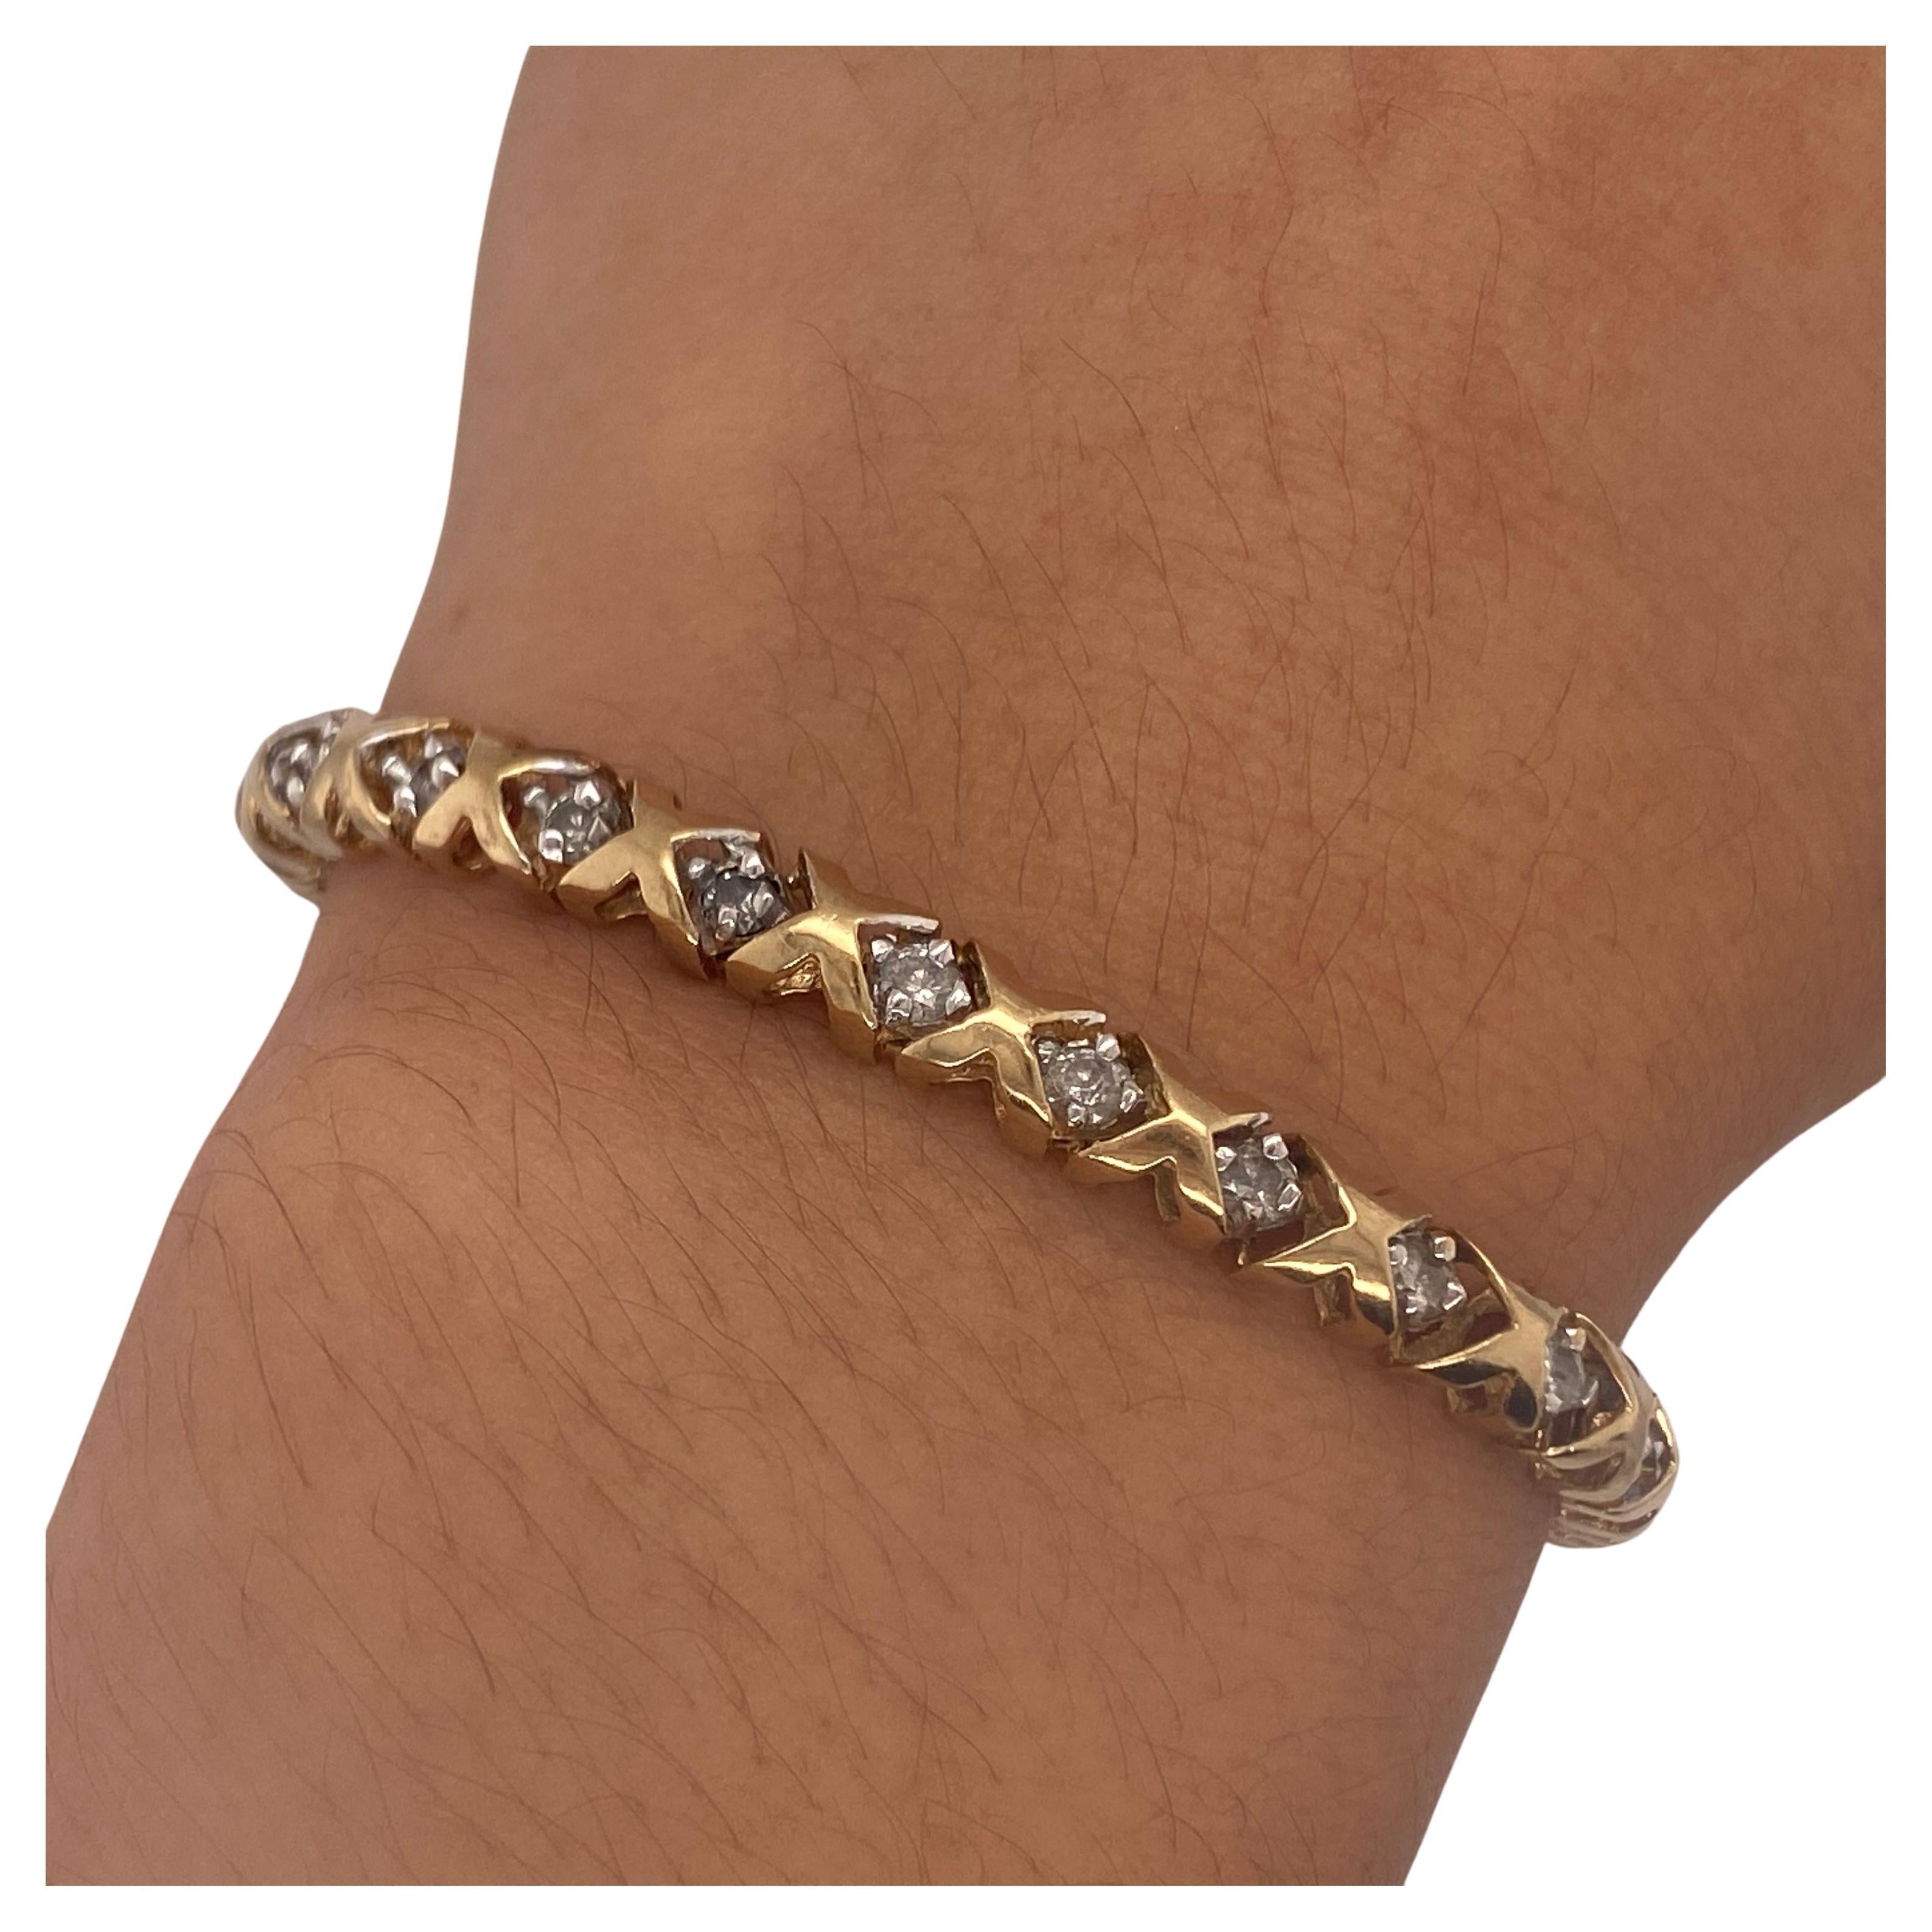 Grace your wrist with this supple and fluid link bracelet featuring 2.00 carats total weight of round brilliant cut diamonds. The design of the bracelet is made with the best shorthand for love and hugs and kisses: a repeating XOXOXO pattern. Each